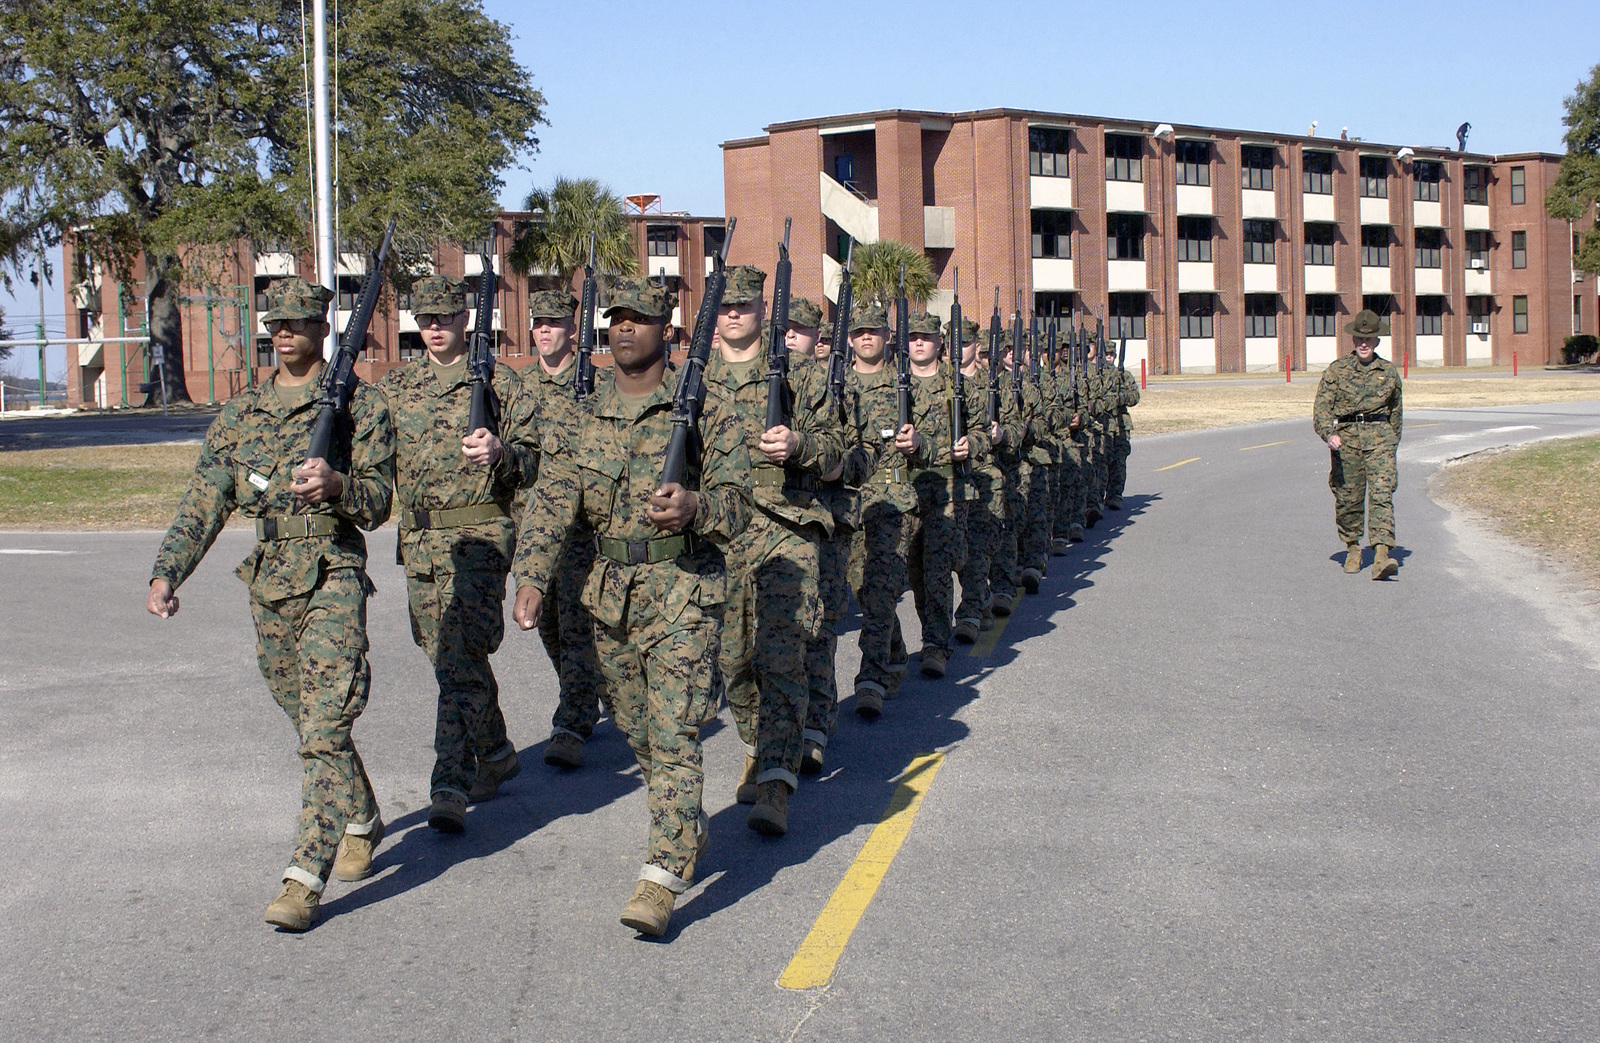 The 2nd Battalion S Fox Company Marches Along Side The 1st Battalion Squad Bays At Marine Corps Recruiting Depot Mcrd Parris Island South Carolina U S National Archives Public Domain Image - mcrd parris island south carolina roblox